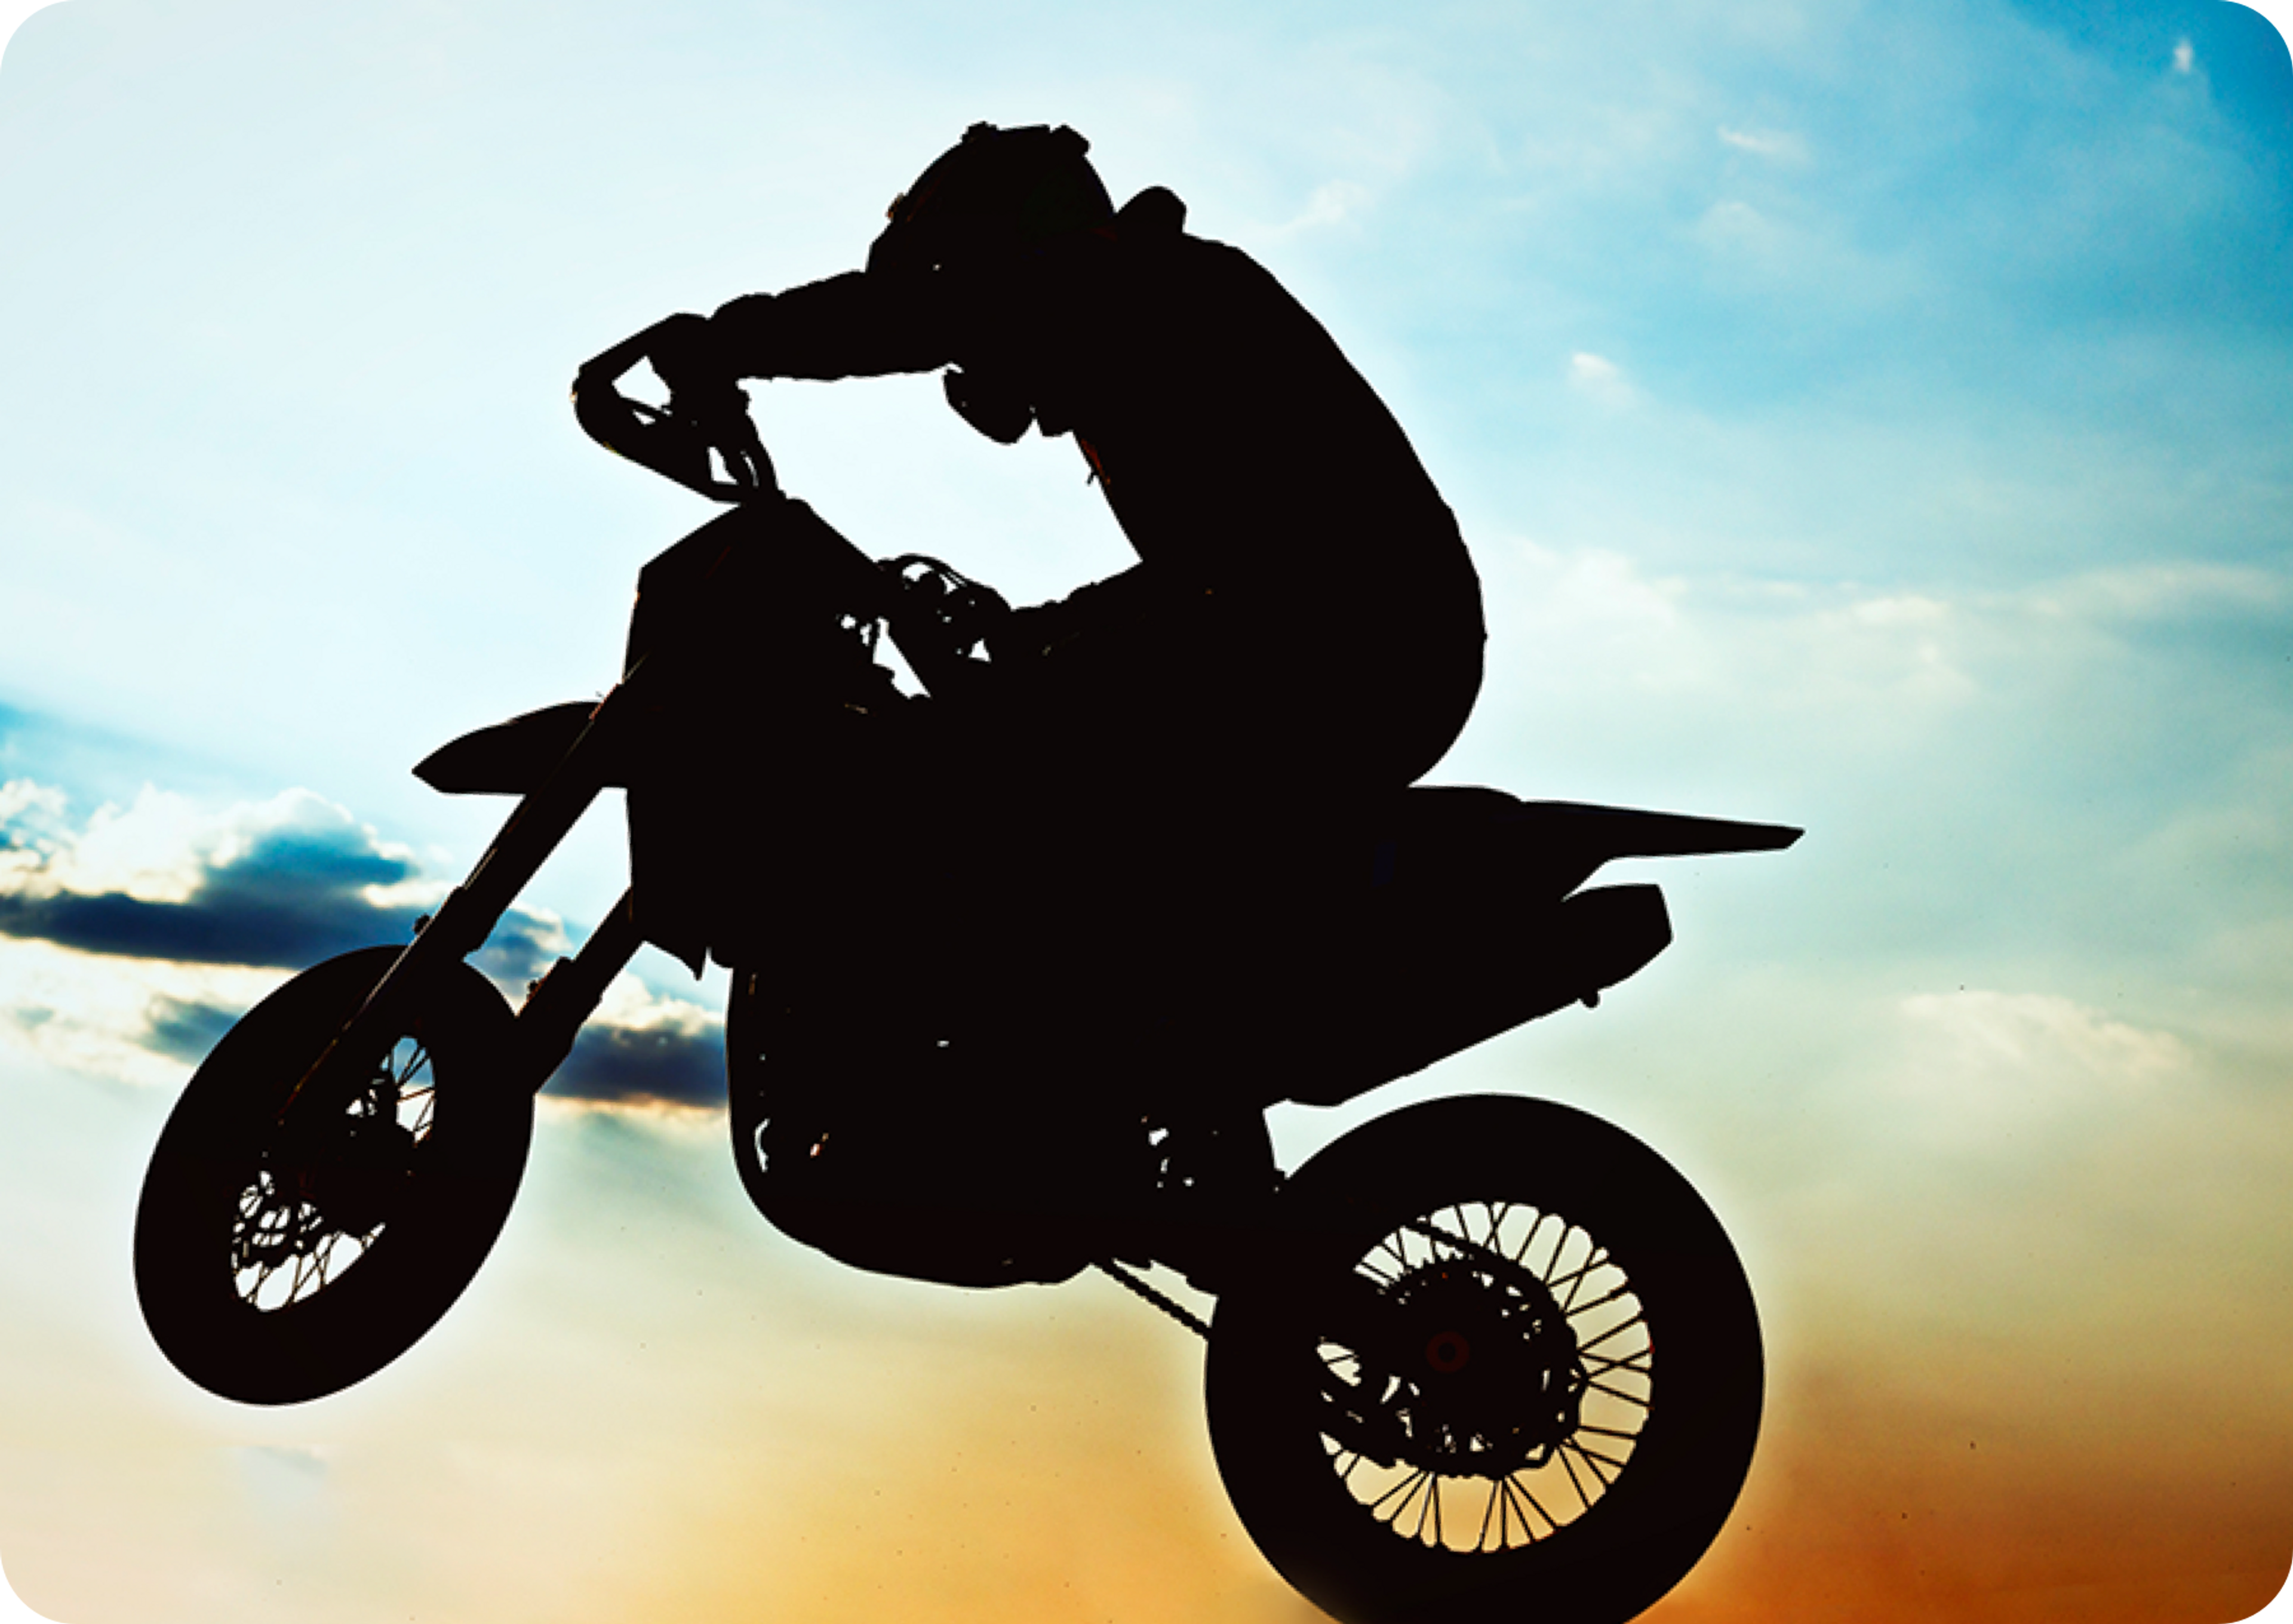 Picture of man riding a dirt bike in the air with " Motorcycle & Powersports" written in the middle of this image in red sentence case letter on a white rectangular background